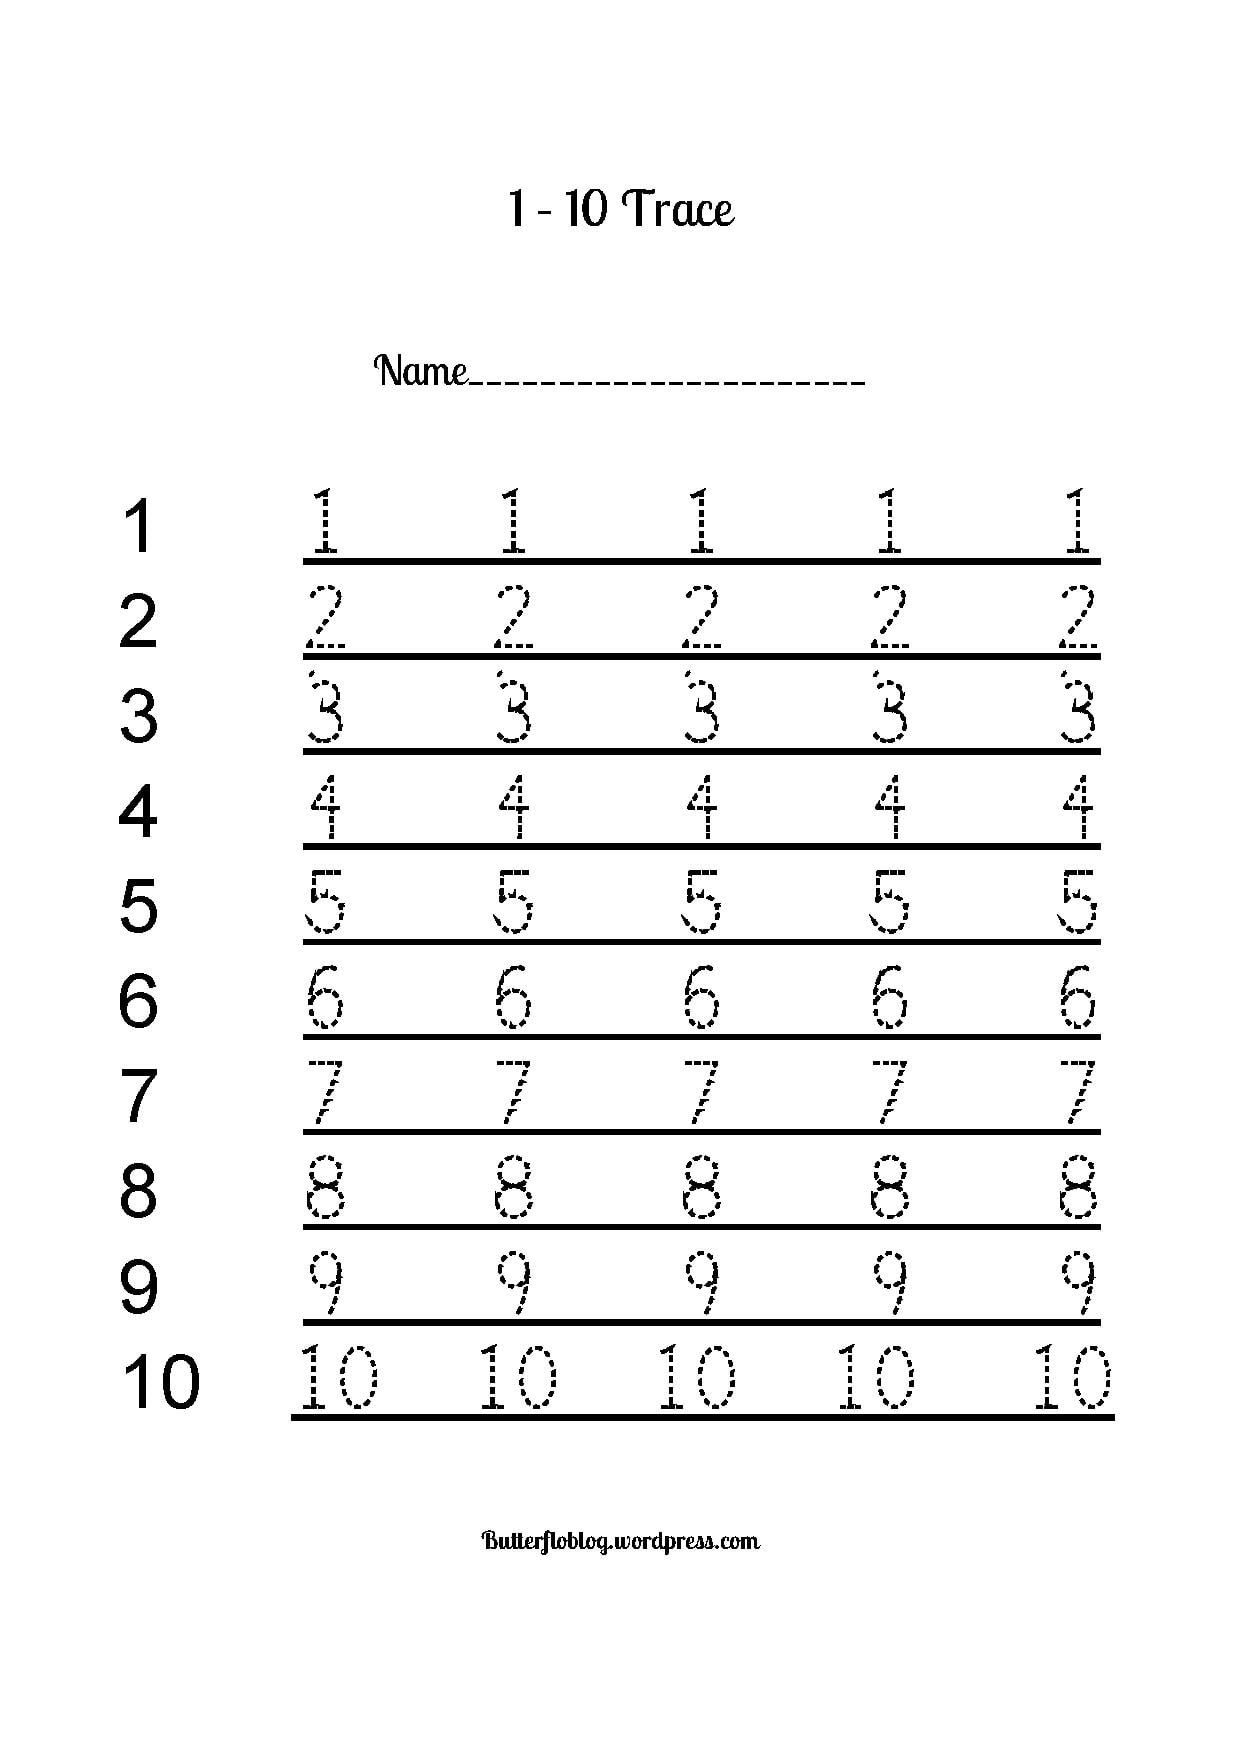 Numbers 1-10 tracing activity